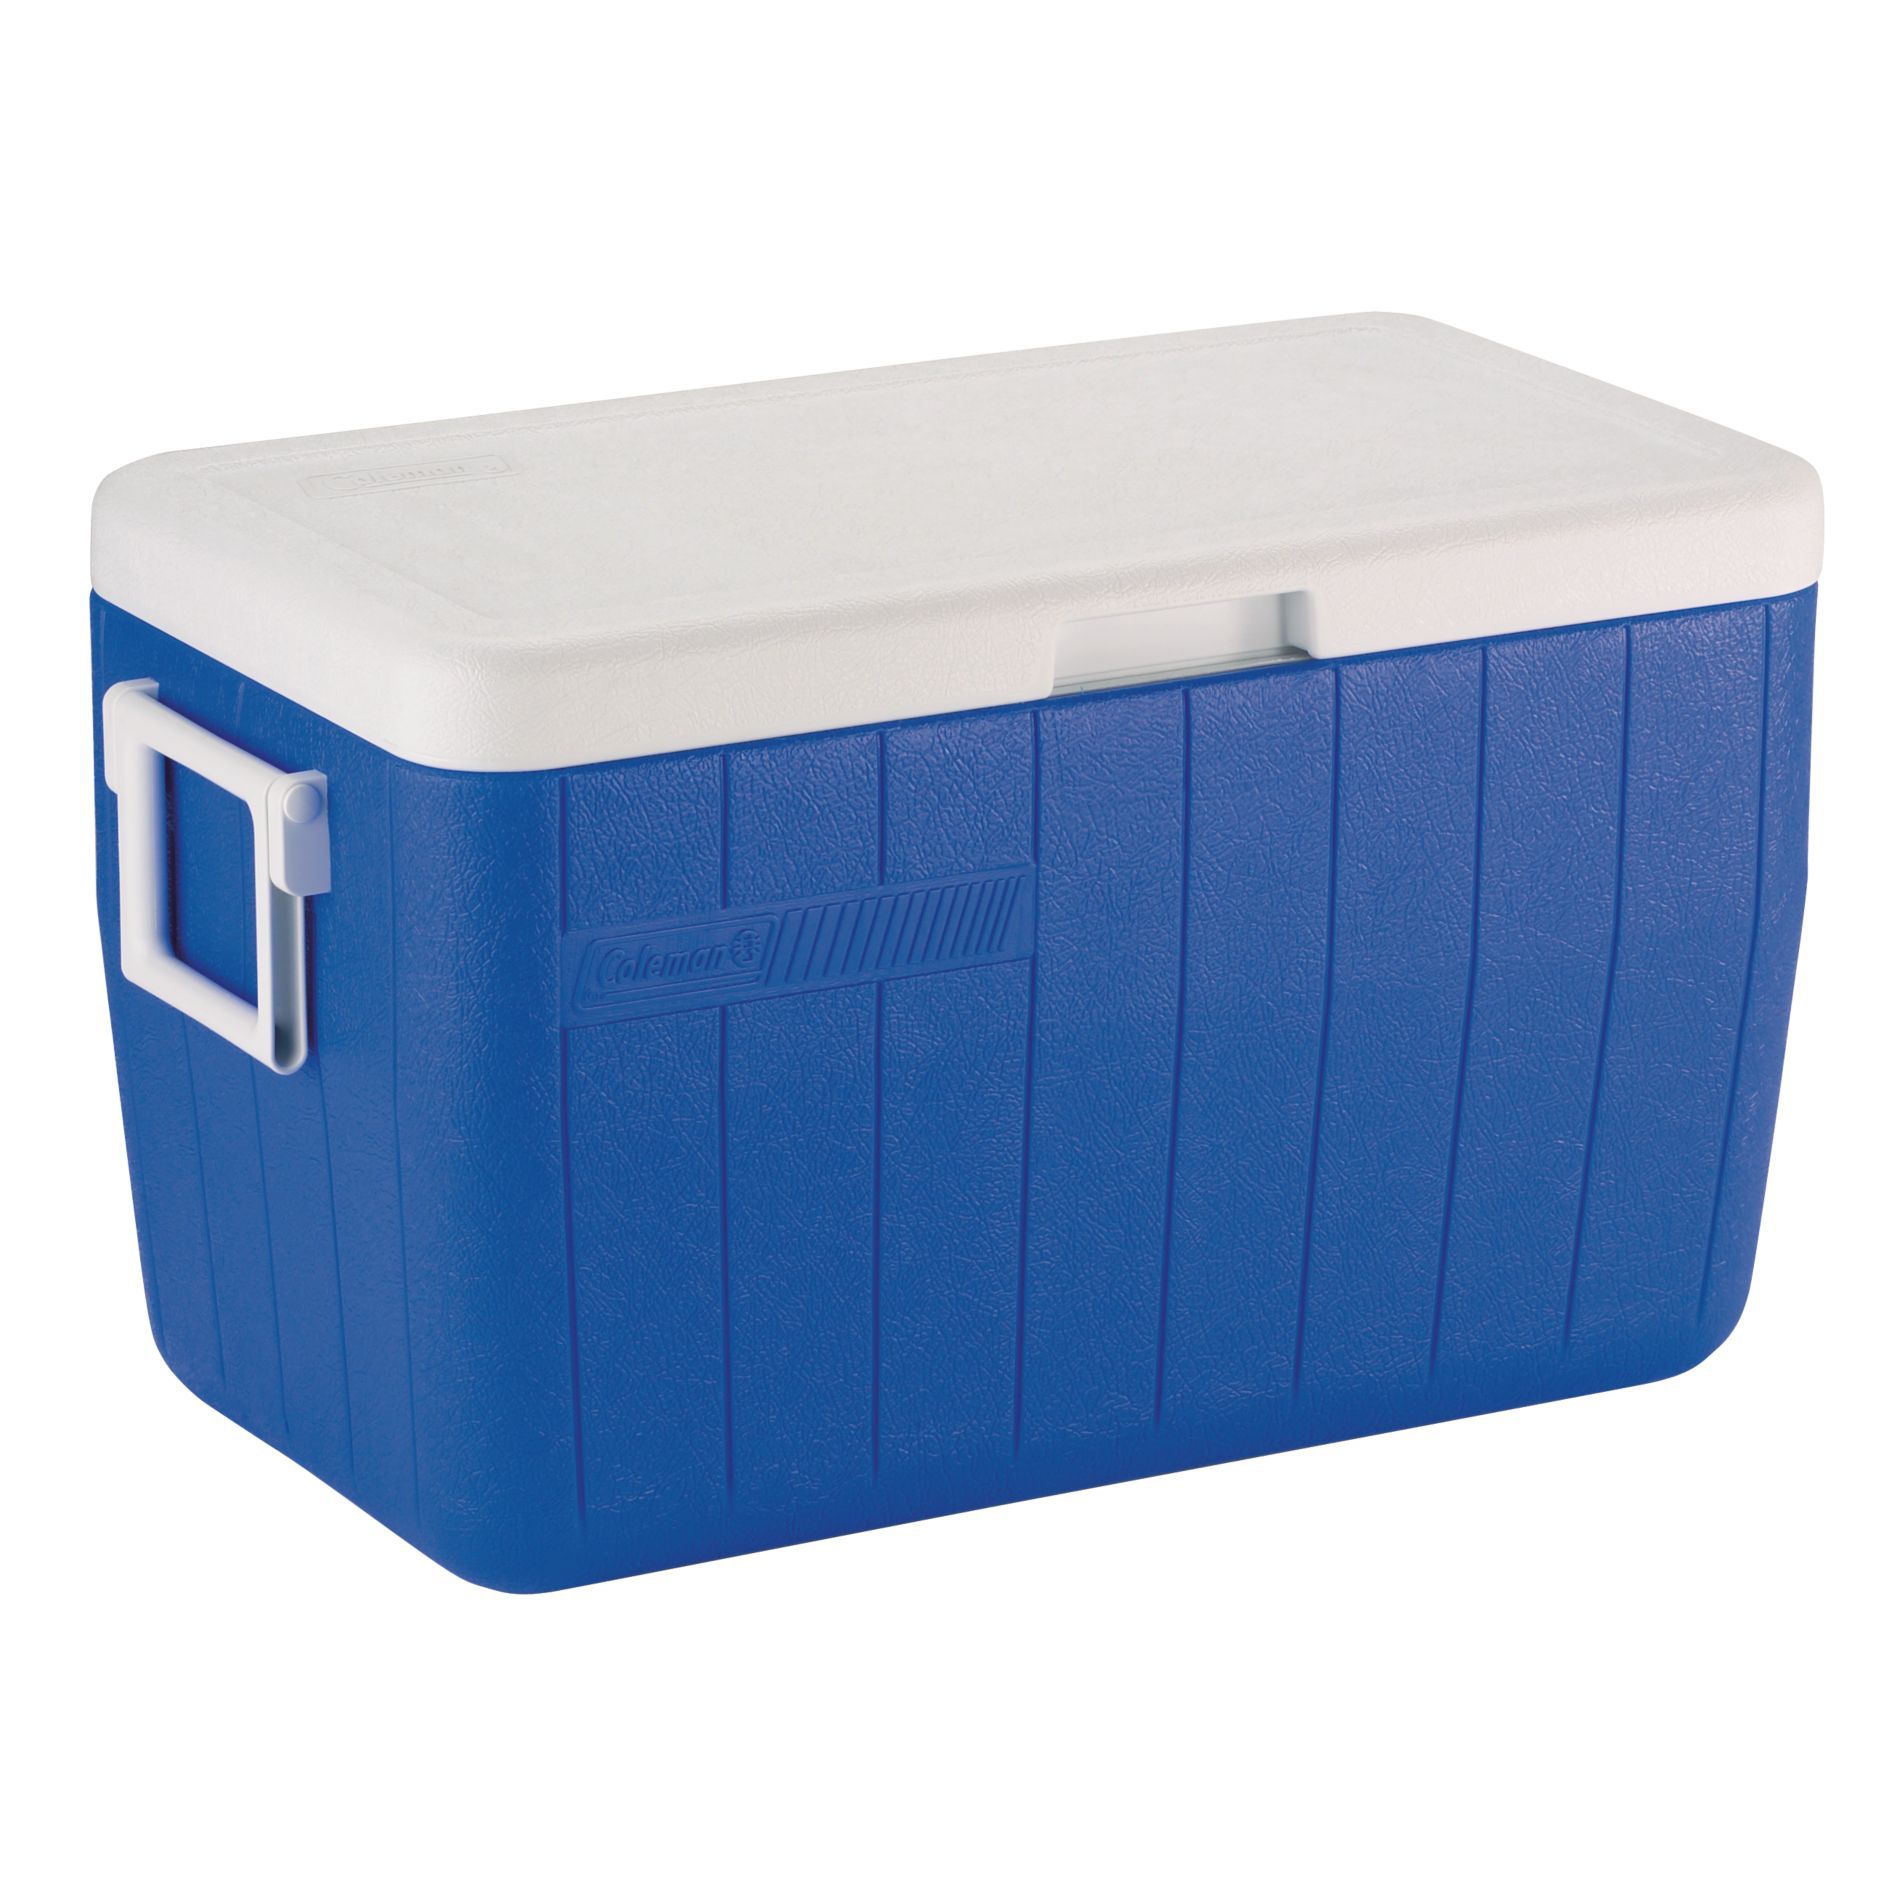 Rubbermaid Victory 48qt Cooler - Red